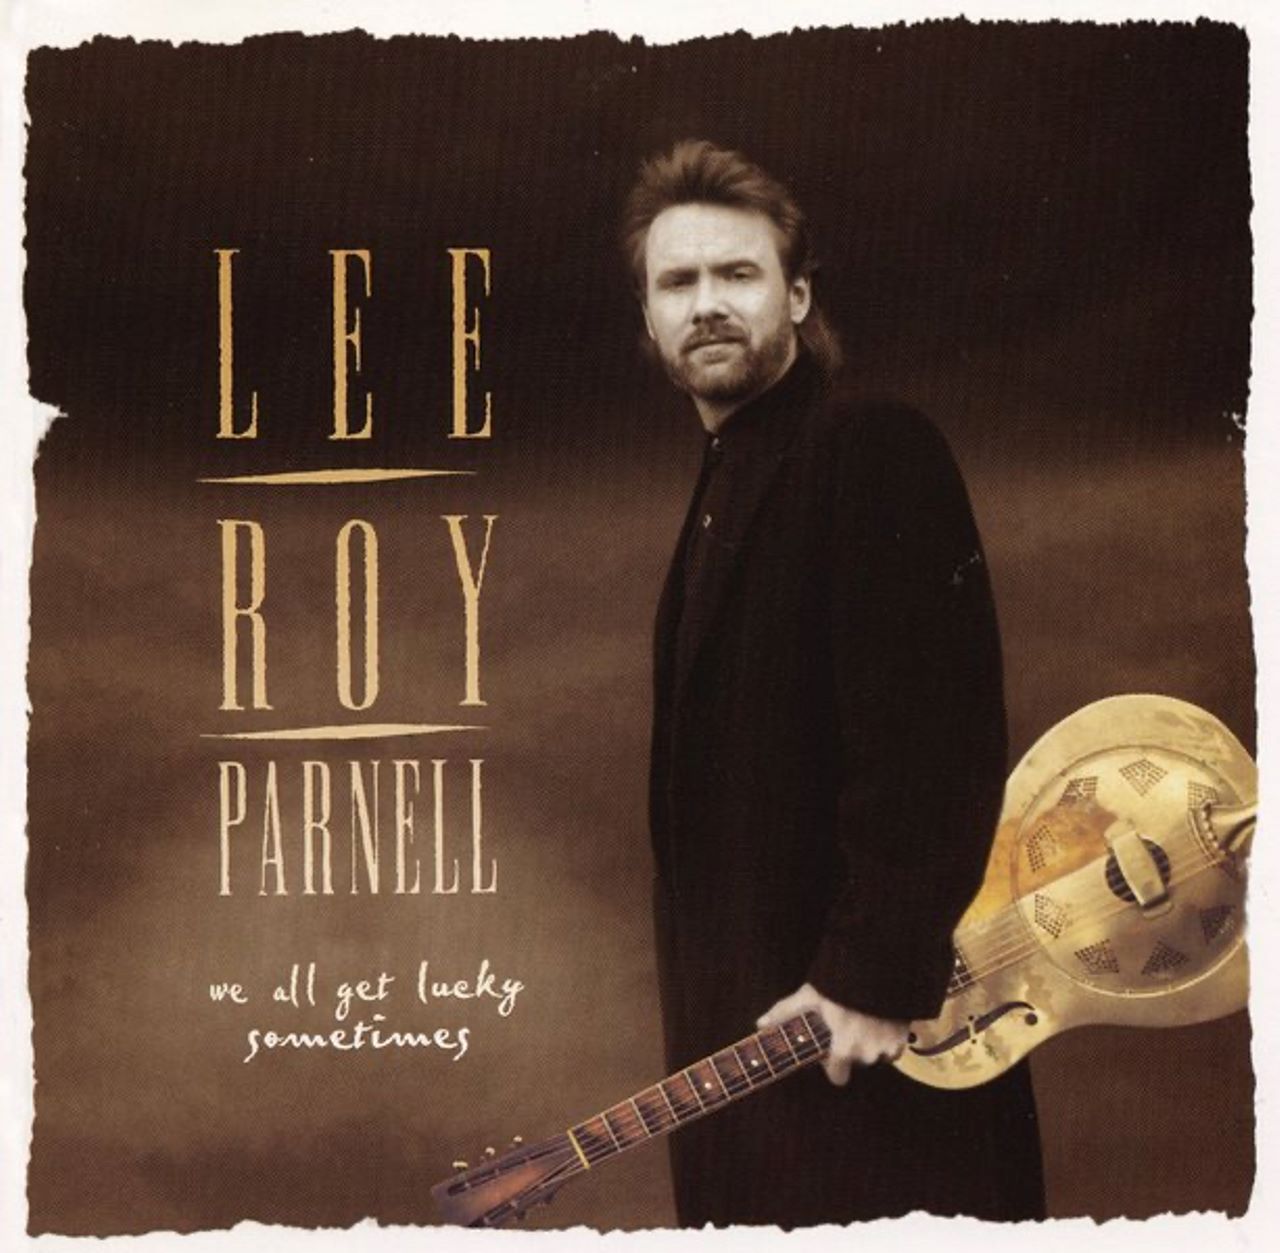 Lee Roy Parnell - We All Get Lucky Sometimes cover album